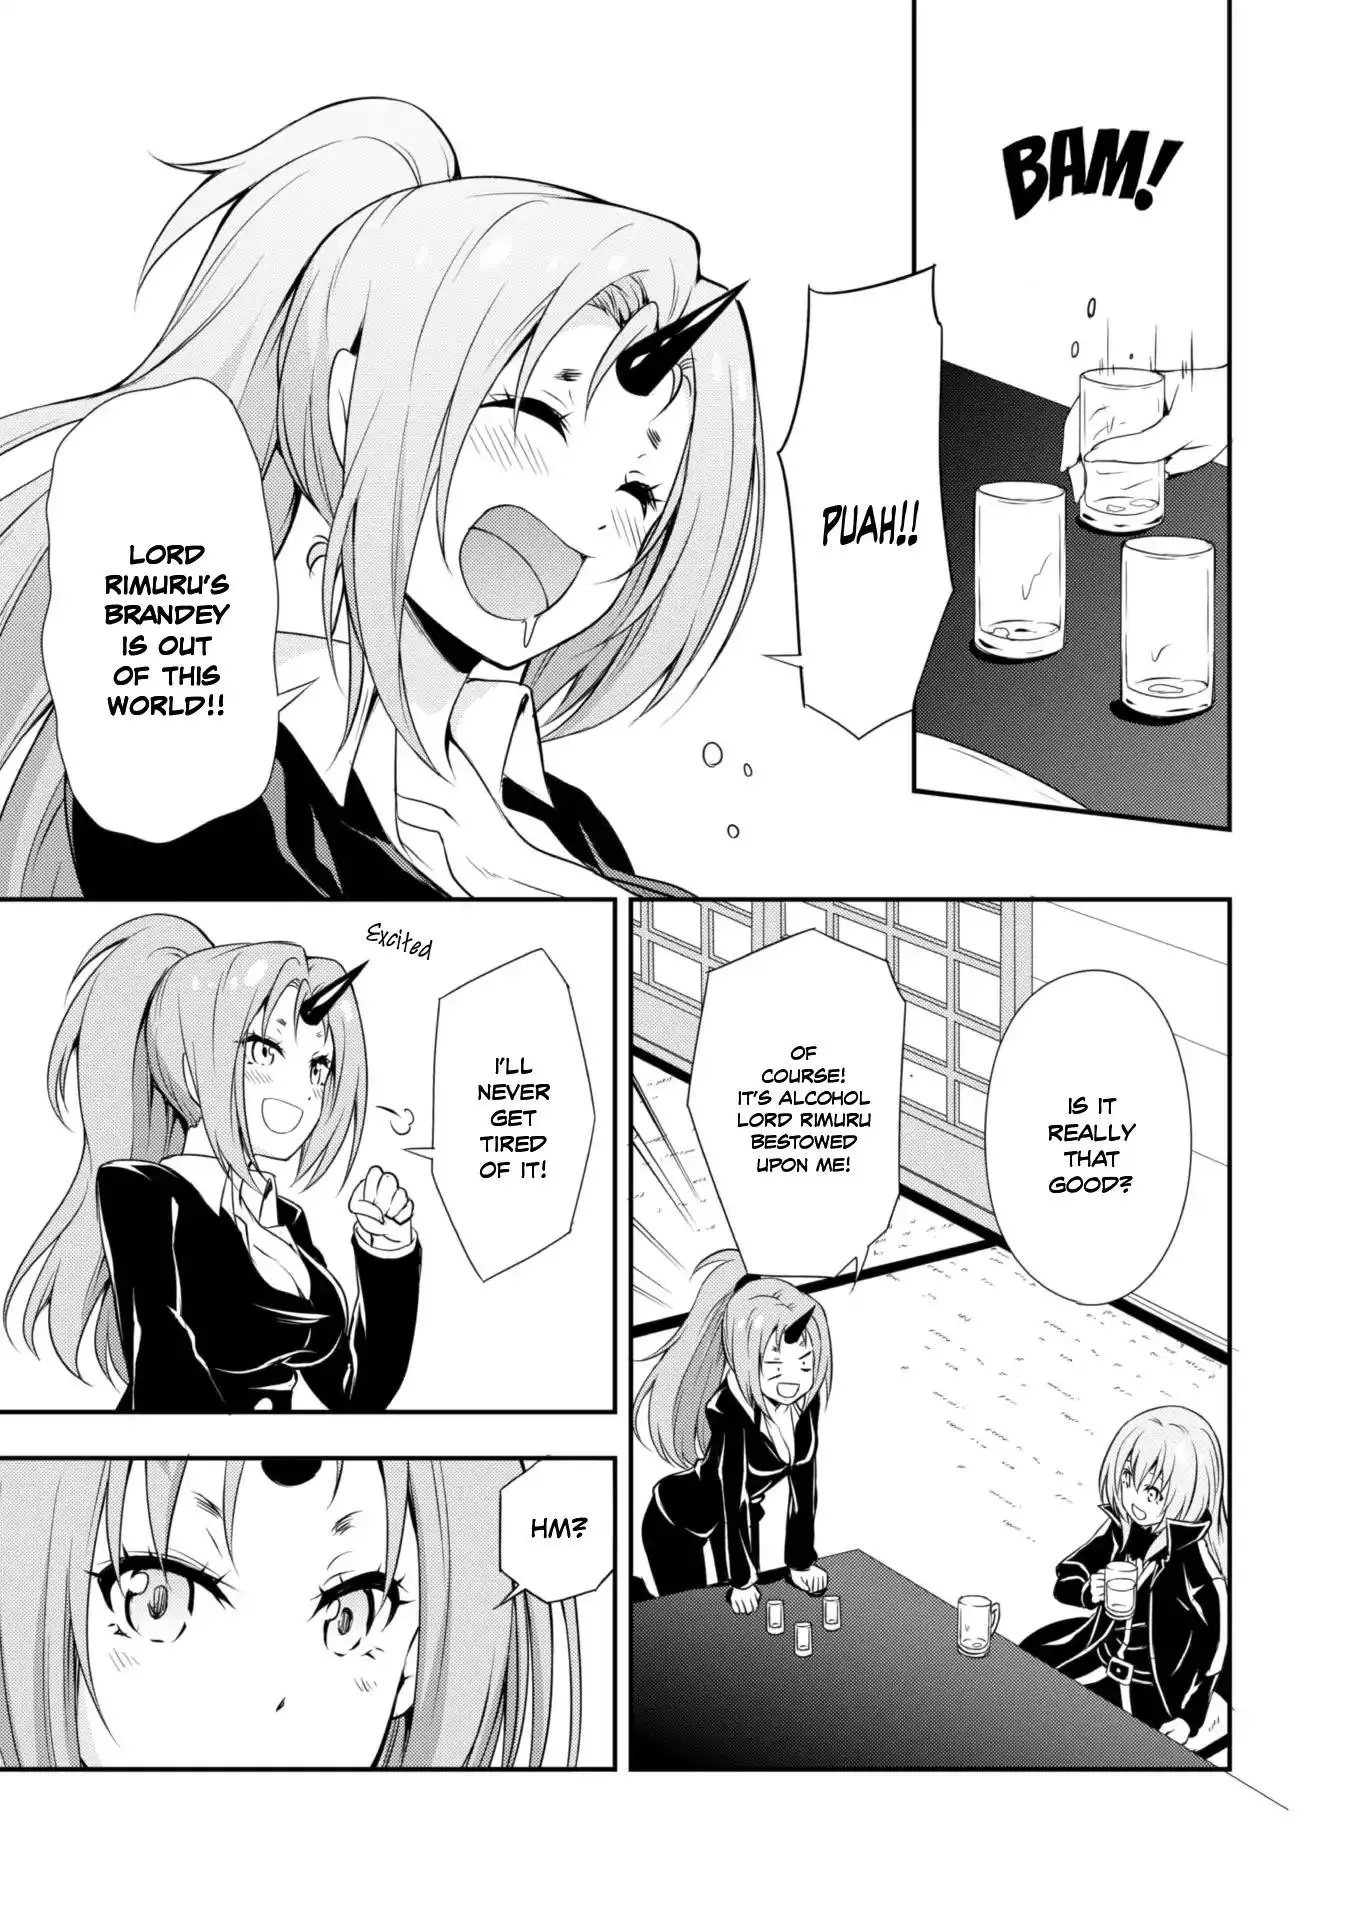 Tensei Shitara Slime Datta Ken: The Ways of Strolling in the Demon Country - 5 page 14